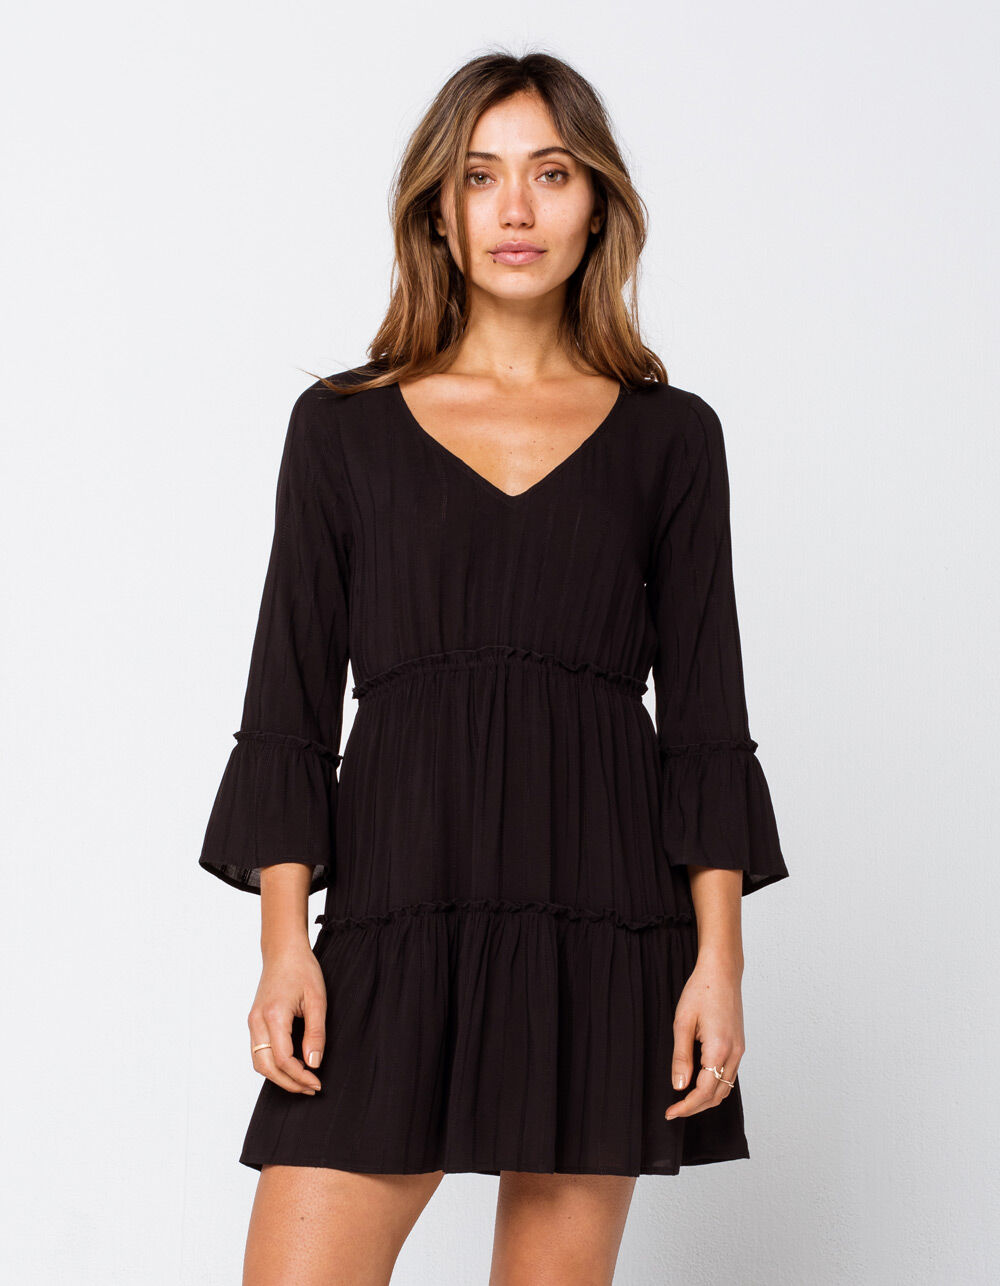 SKY AND SPARROW Tiered Bell Sleeve Black Dress - BLACK | Tillys